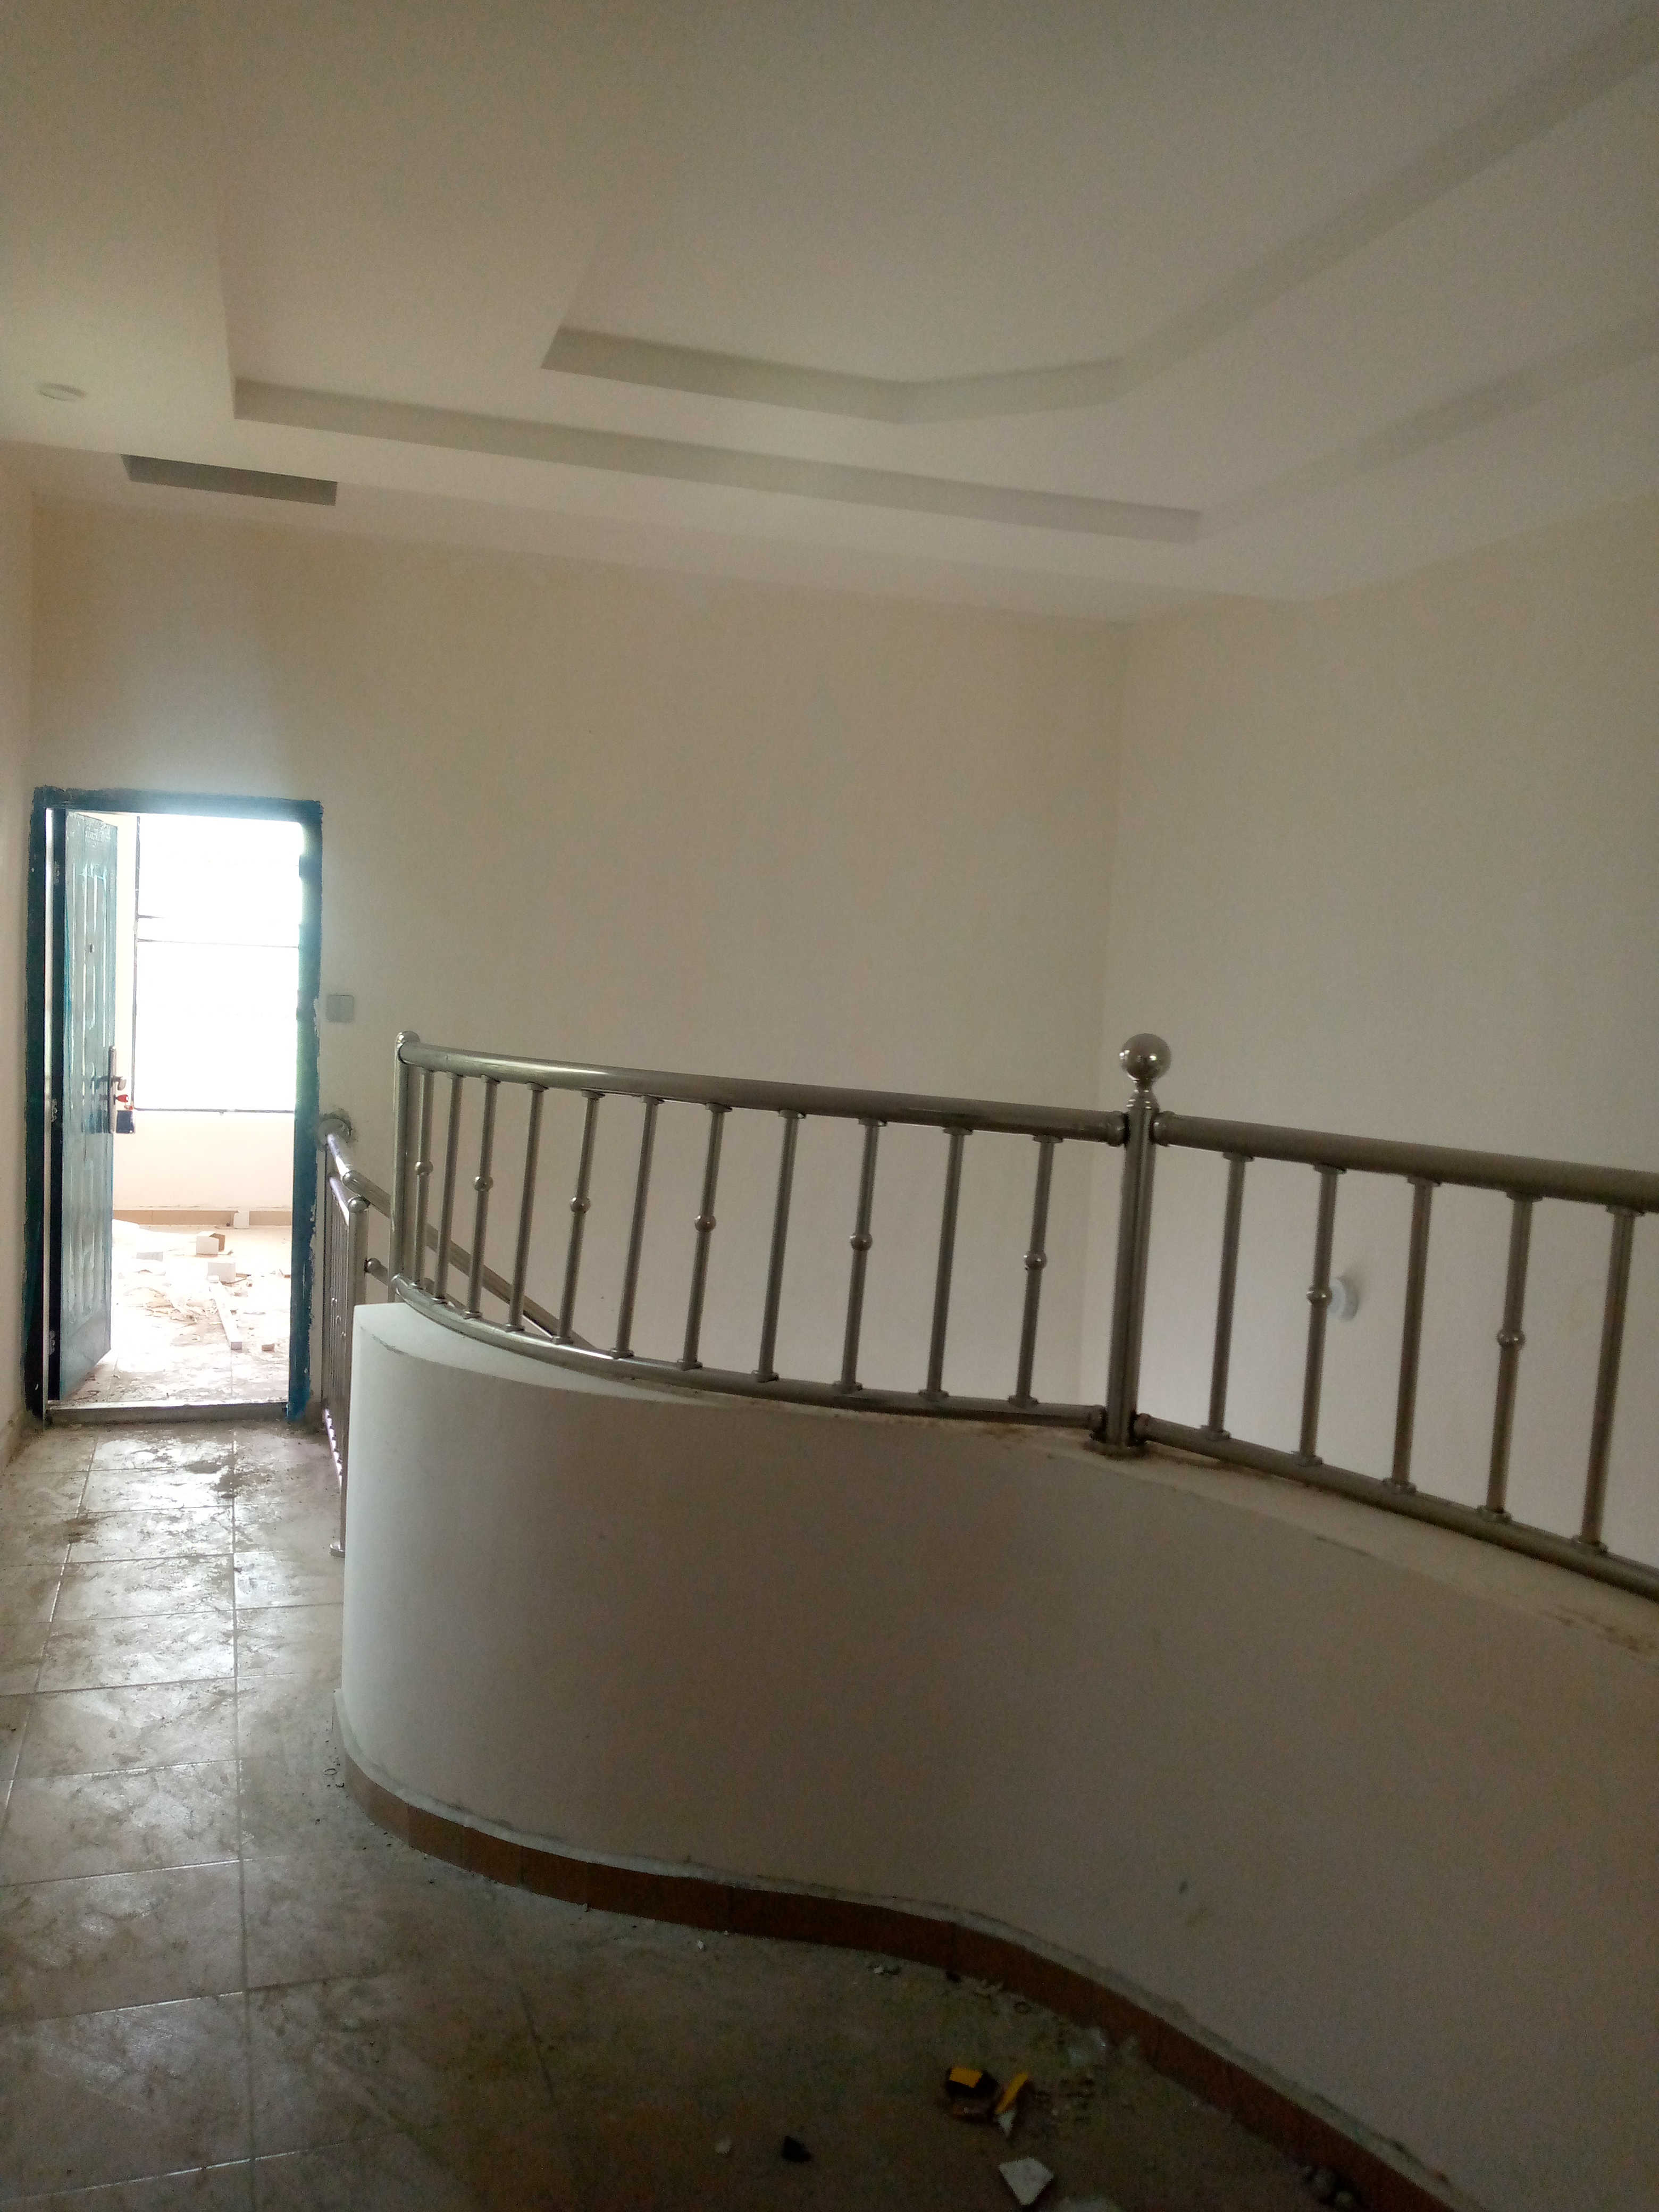 Executive gigantic newly built all rooms en-suite 3 bedrooms with boys quarter